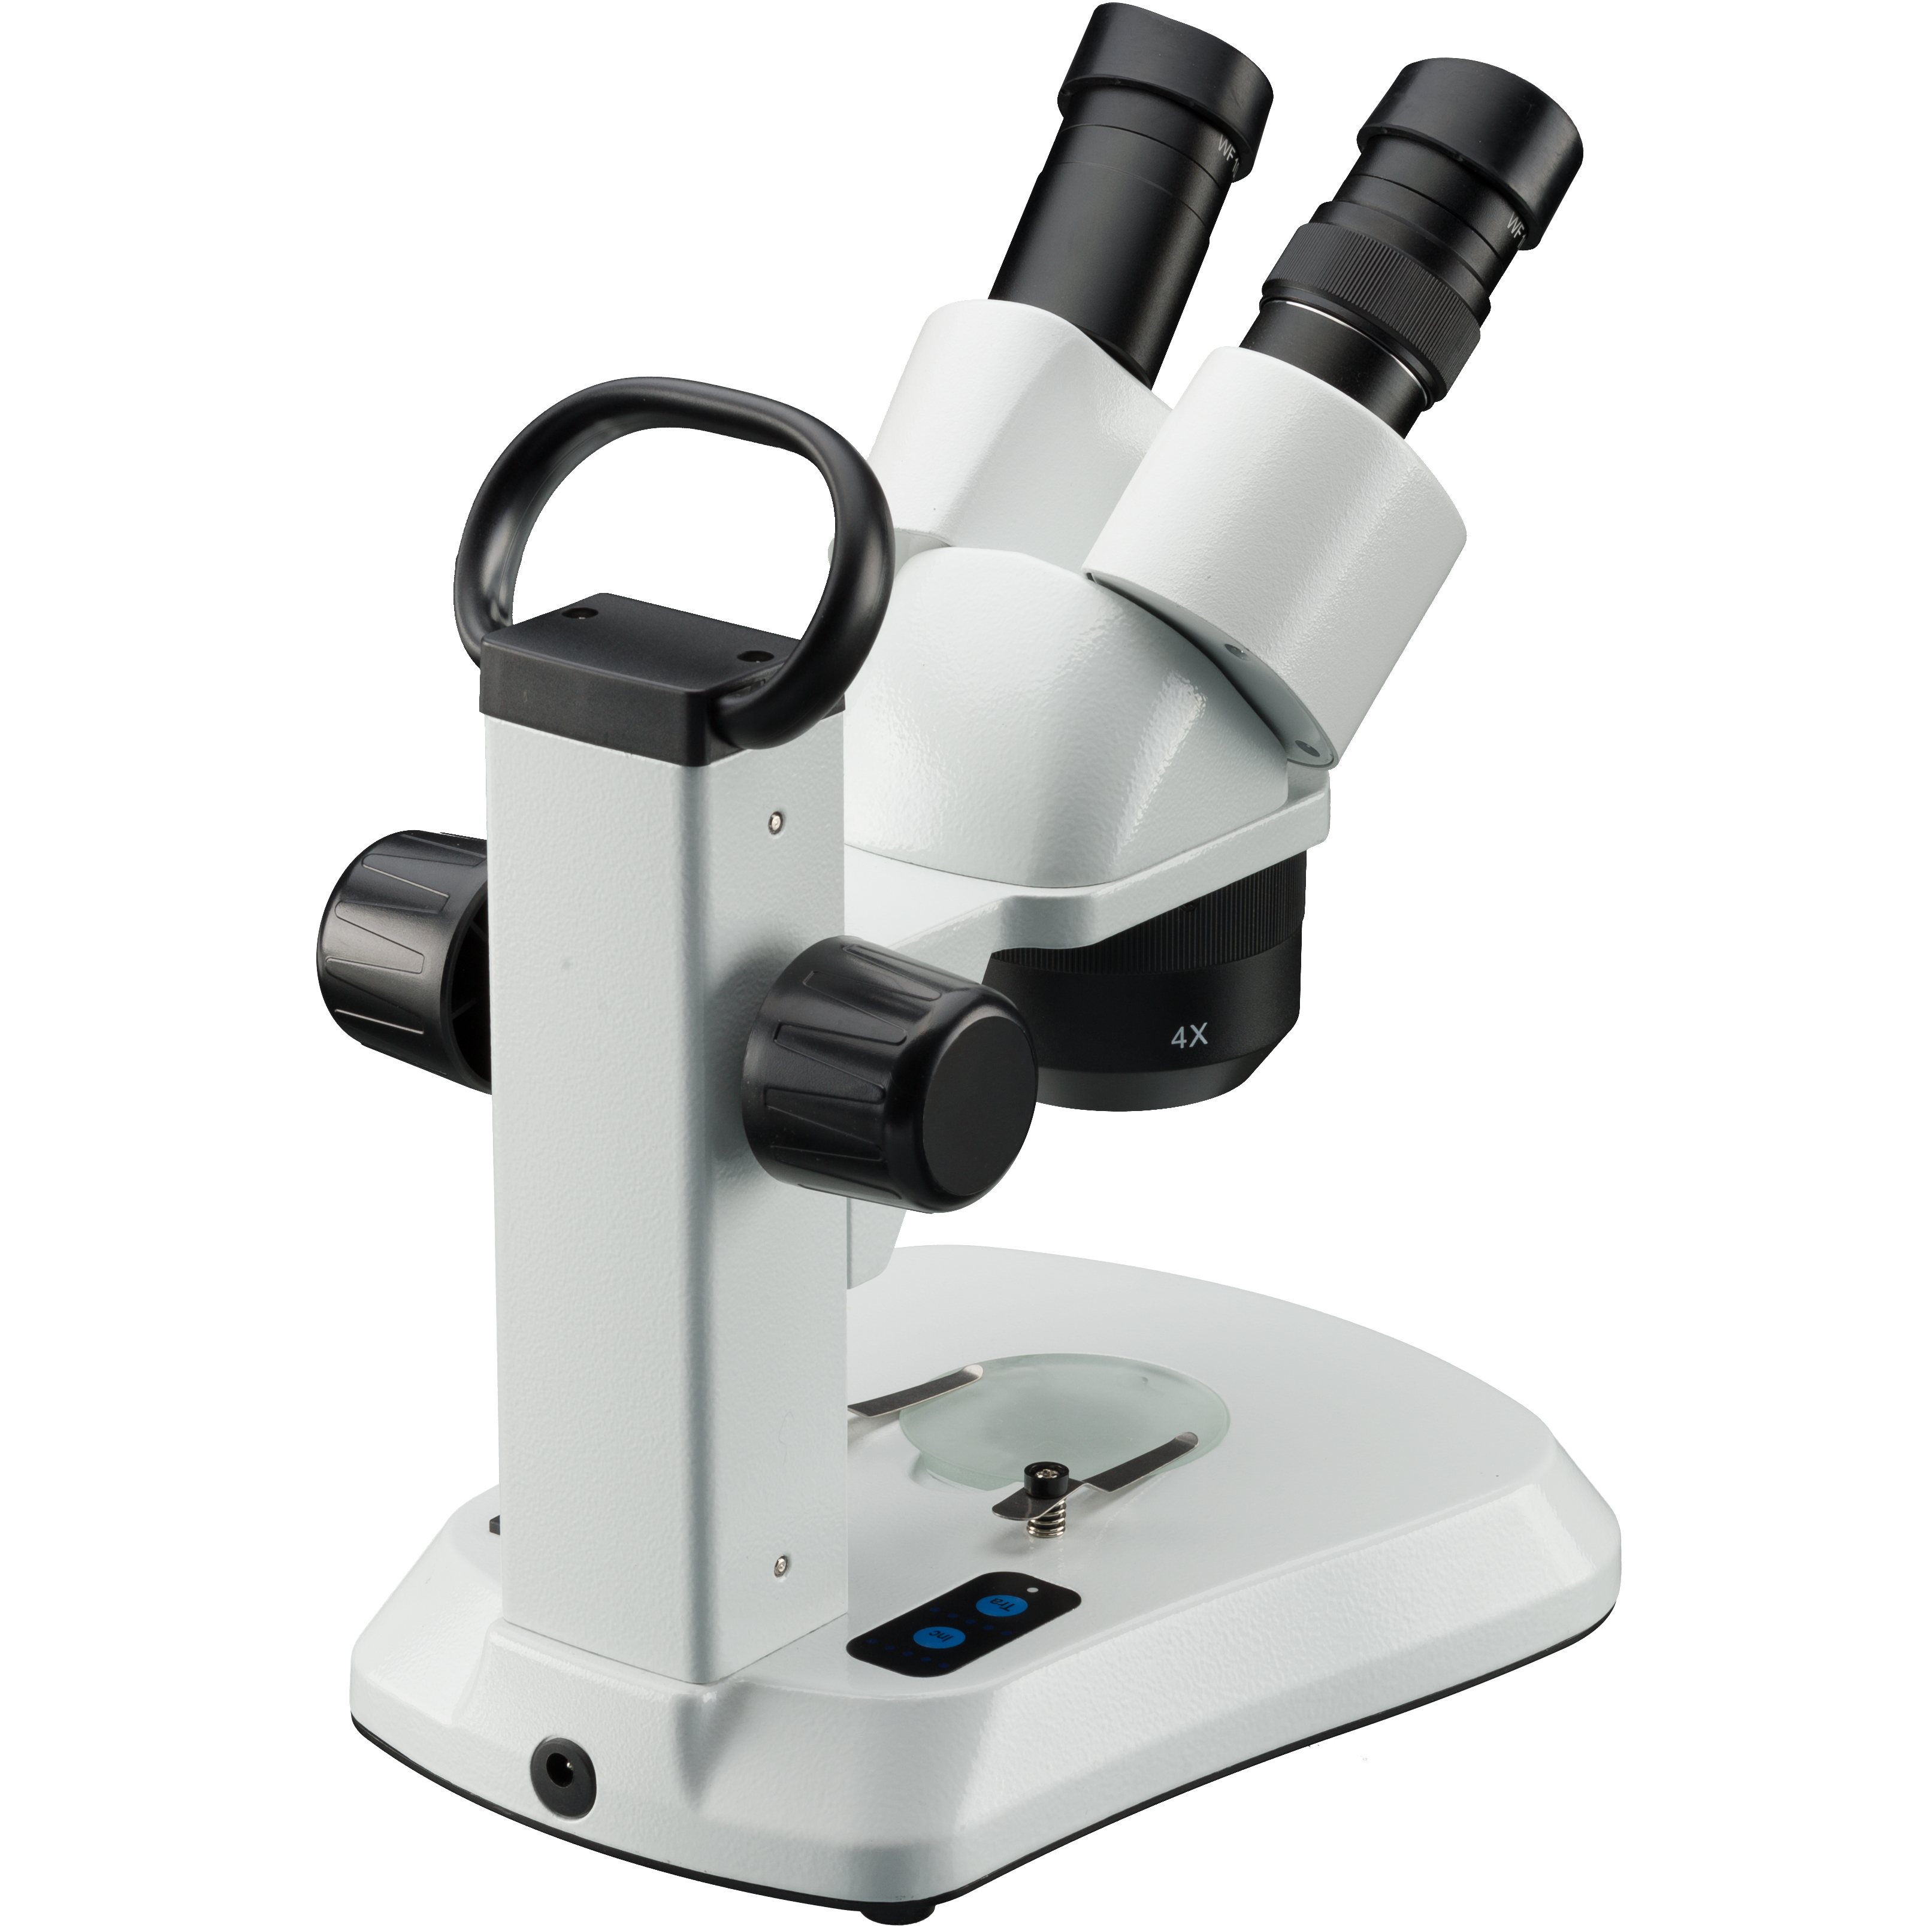 BRESSER Analyth STR 10x - 40x Stereo reflected and transmitted light microscope with MikrOkular Full HD eyepiece camera